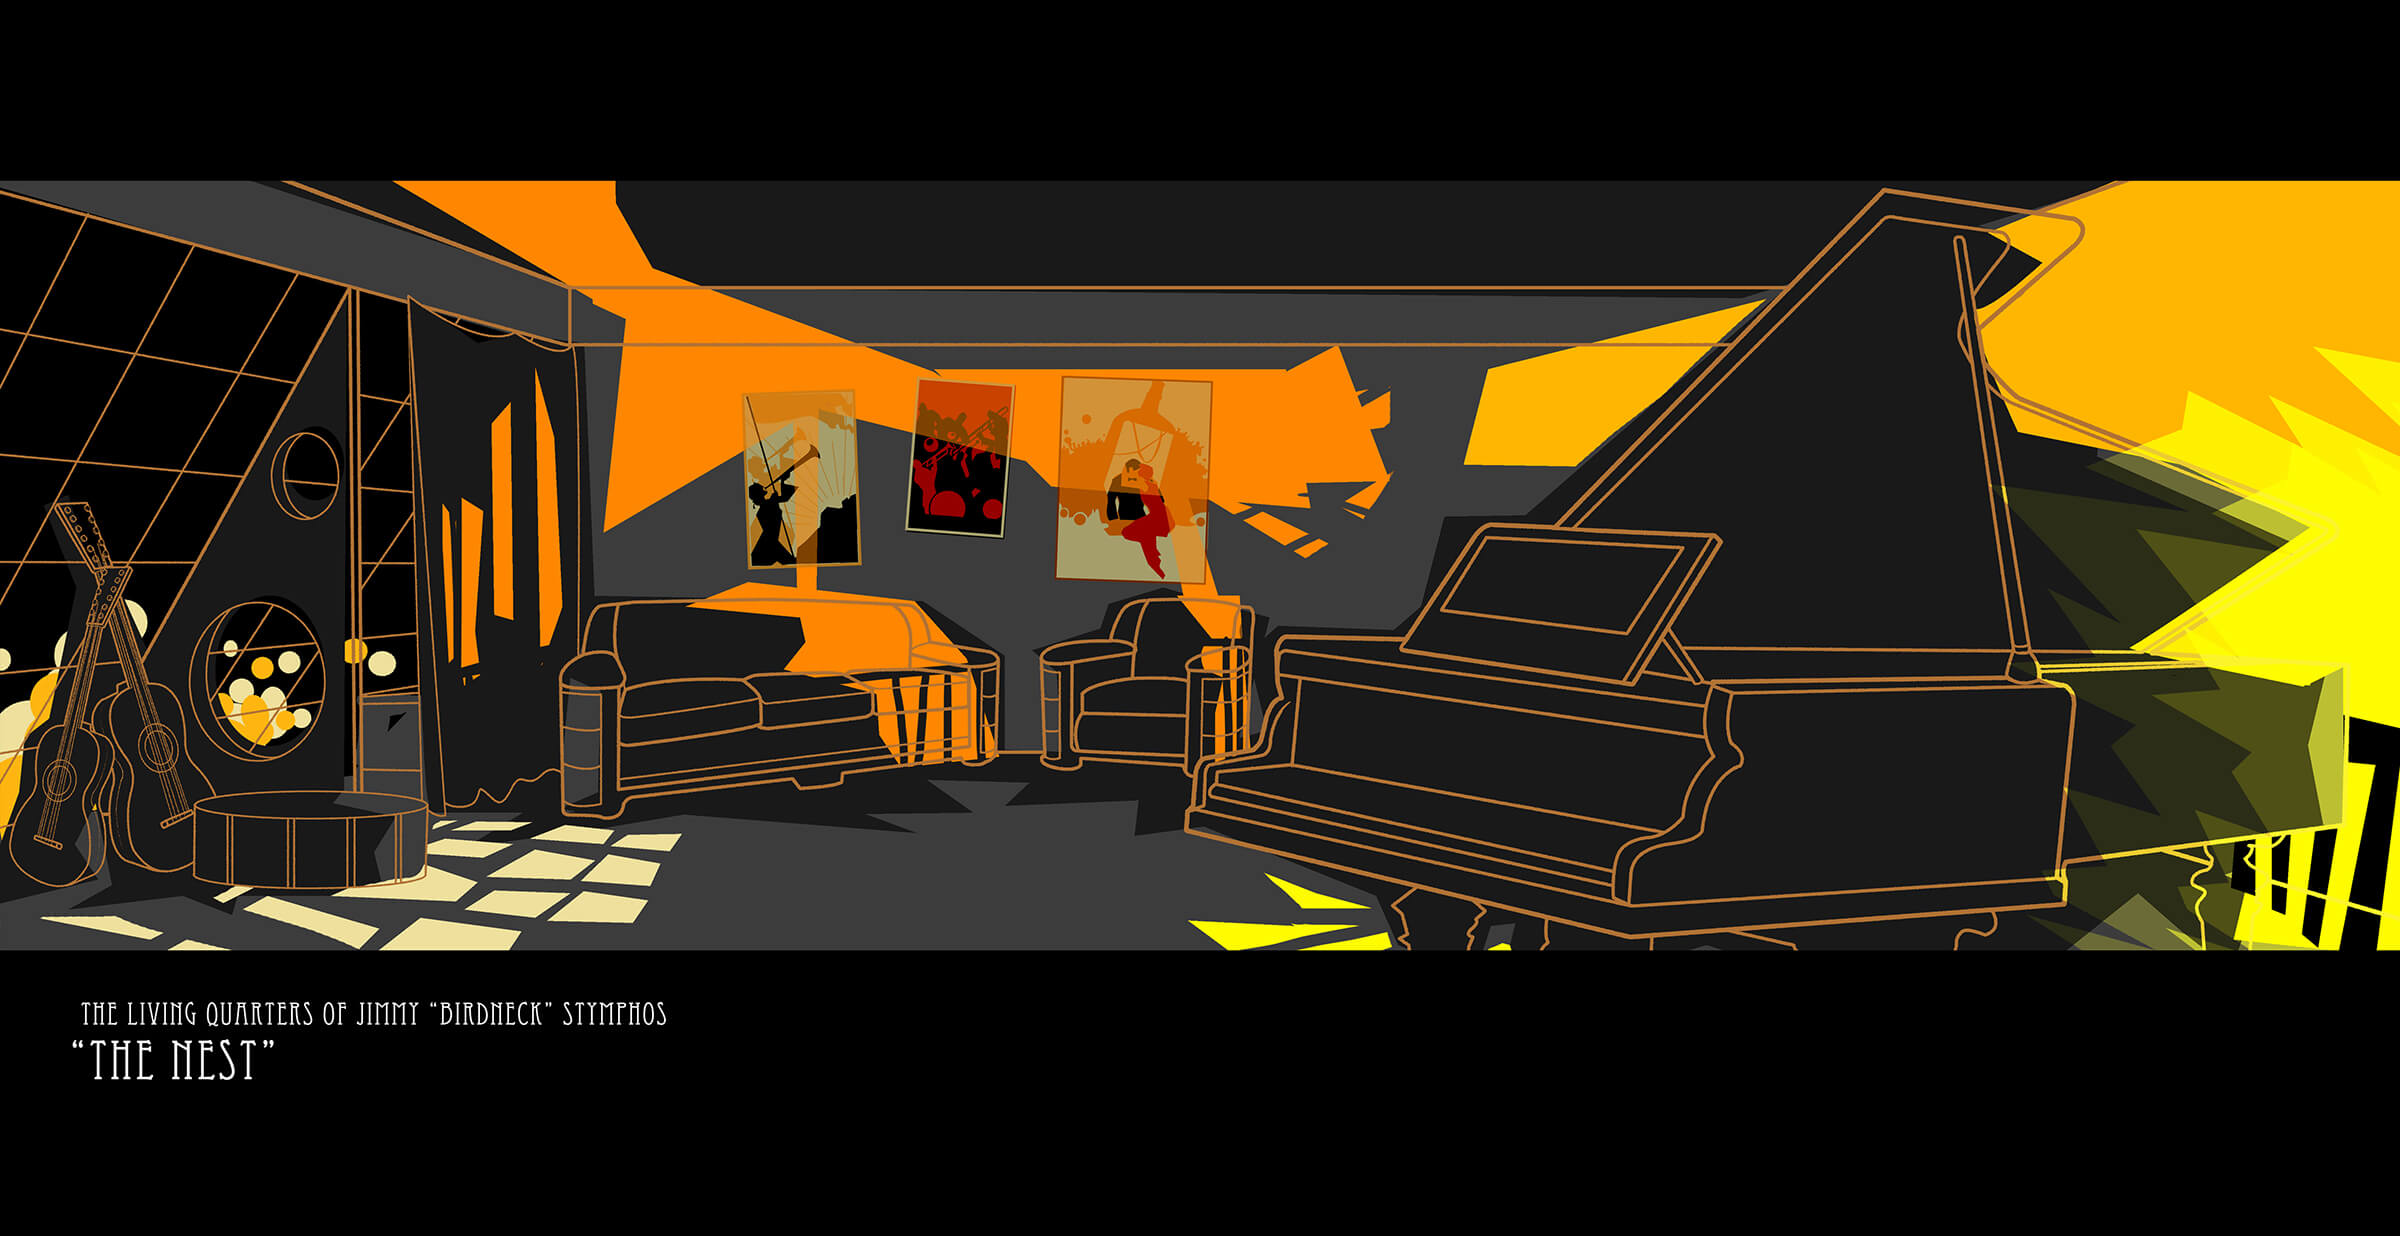 Jazz-era living room shaded stylistically in oranges, blacks, and yellows featuring a grand piano, couches, and guitars.